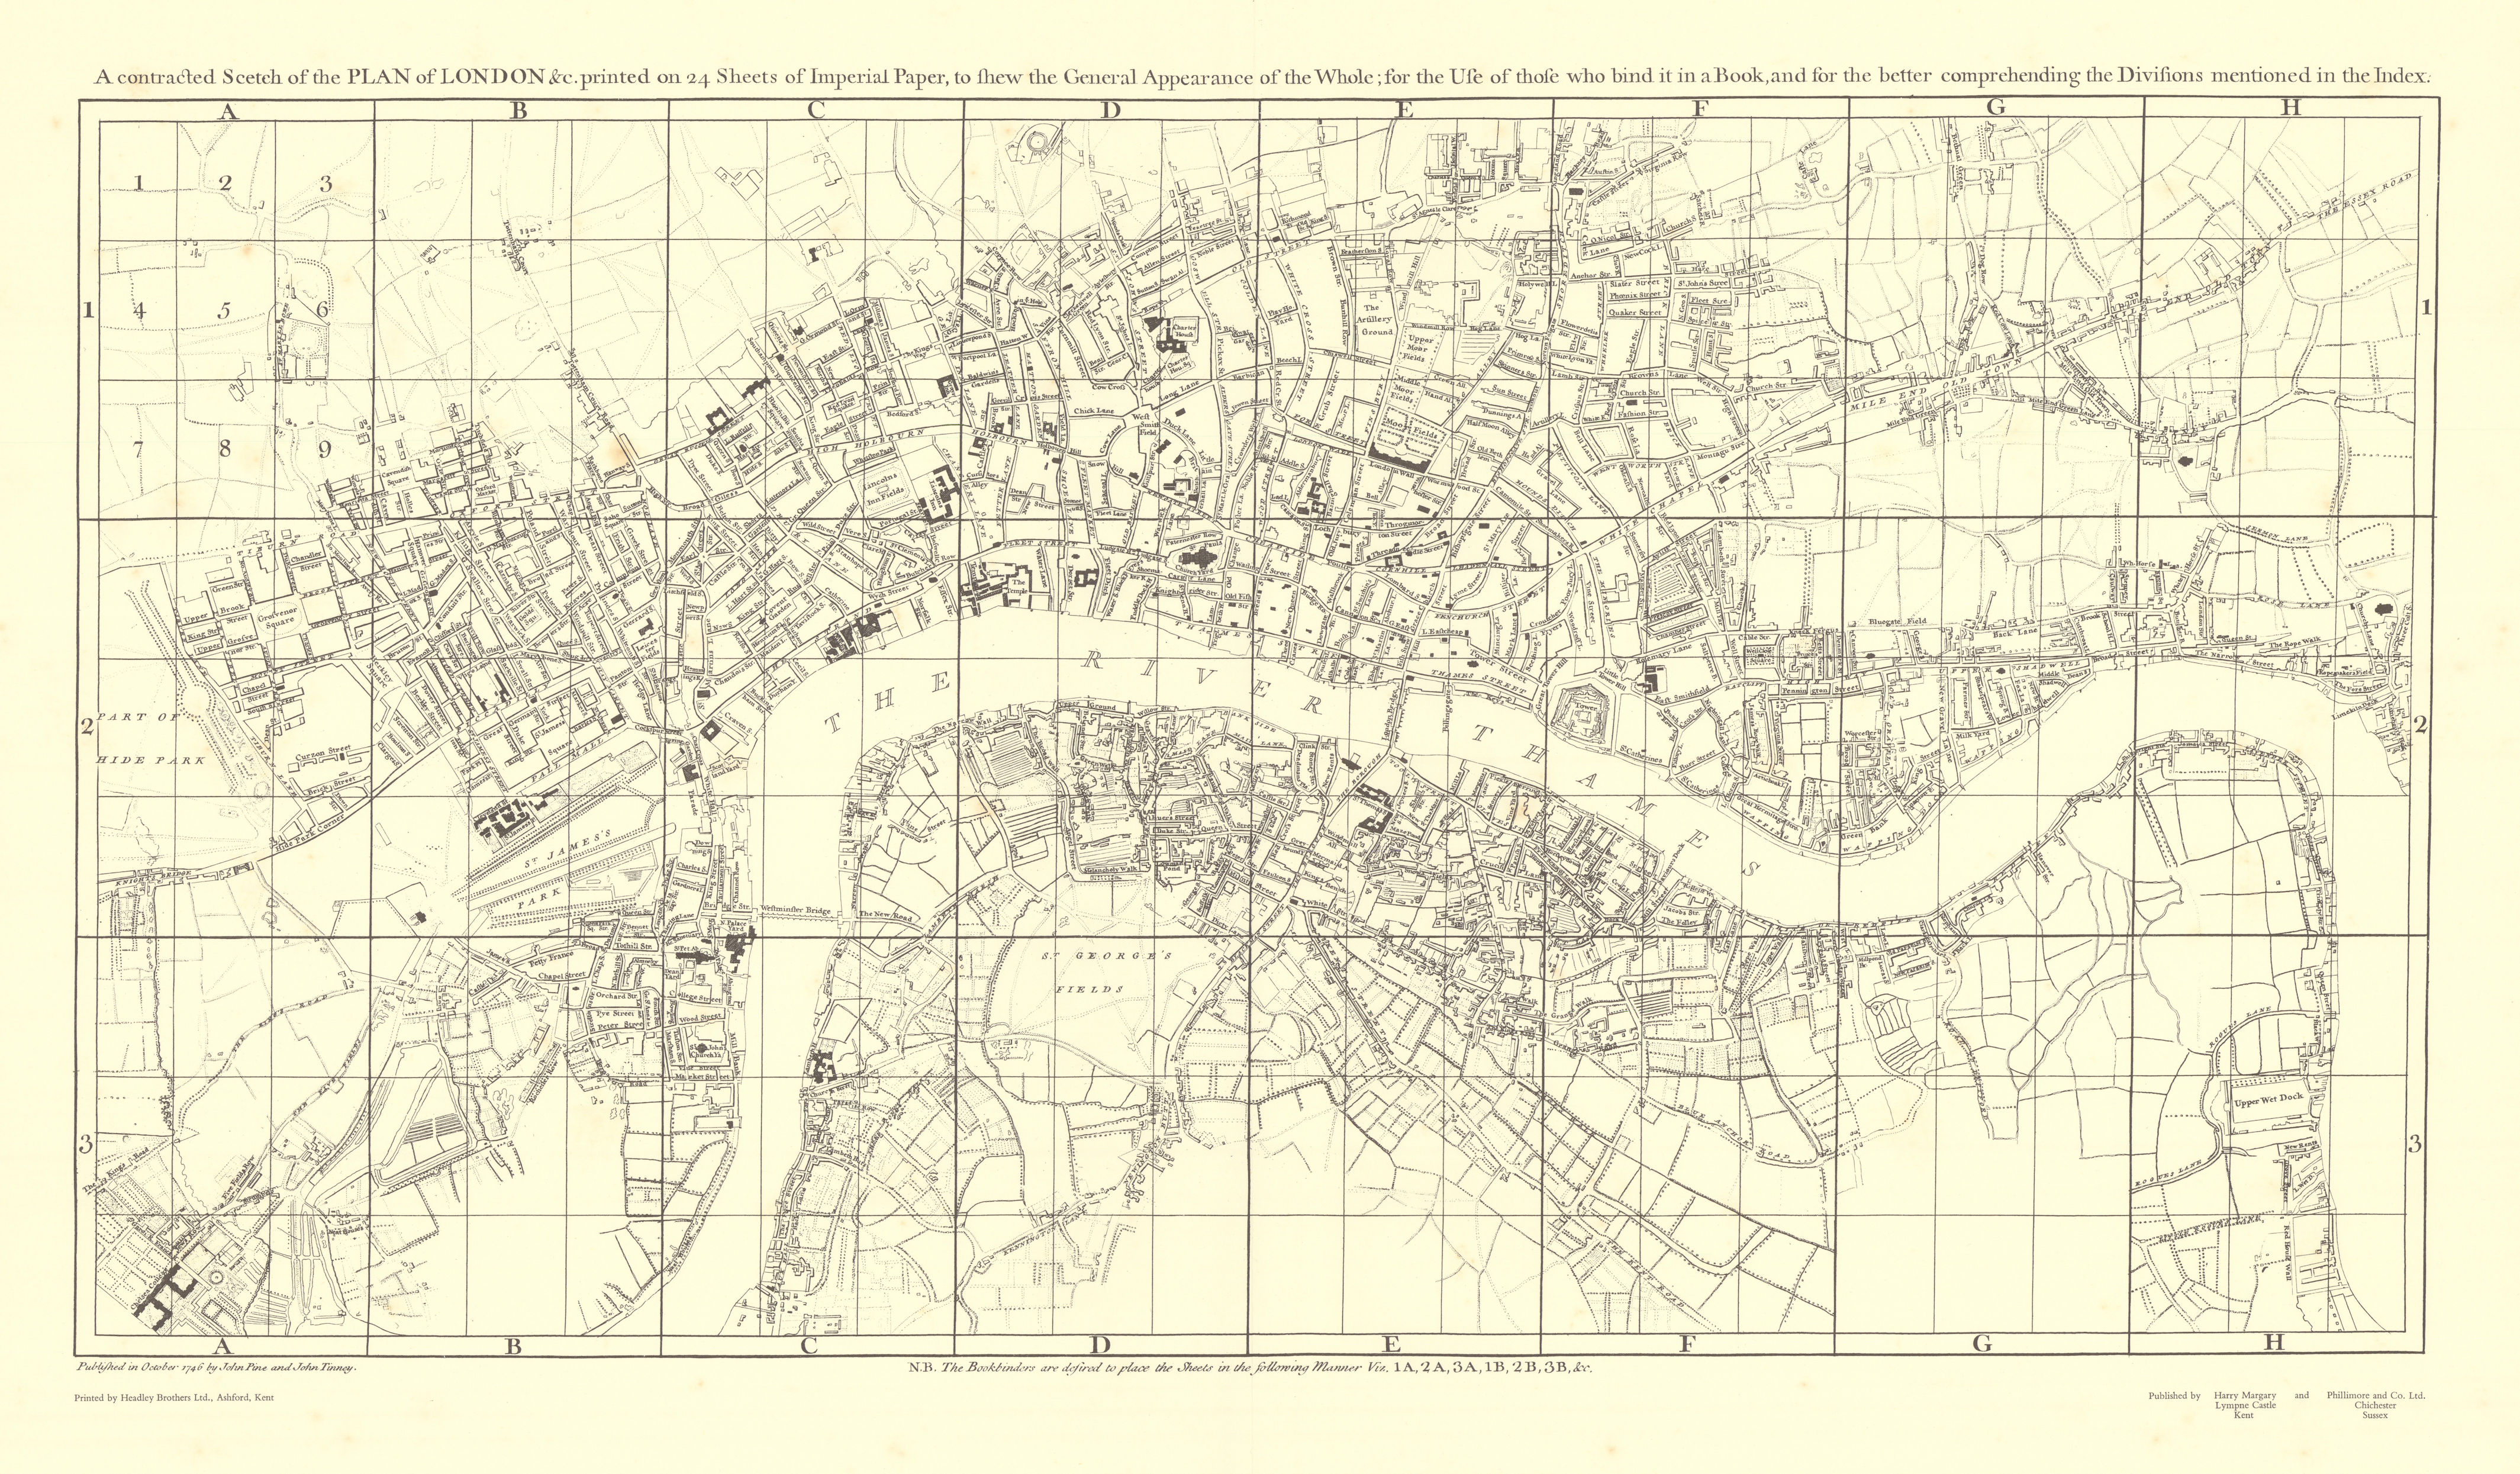 A contracted Scetch of the Plan of London &c, after John Rocque 1971 (1746) map